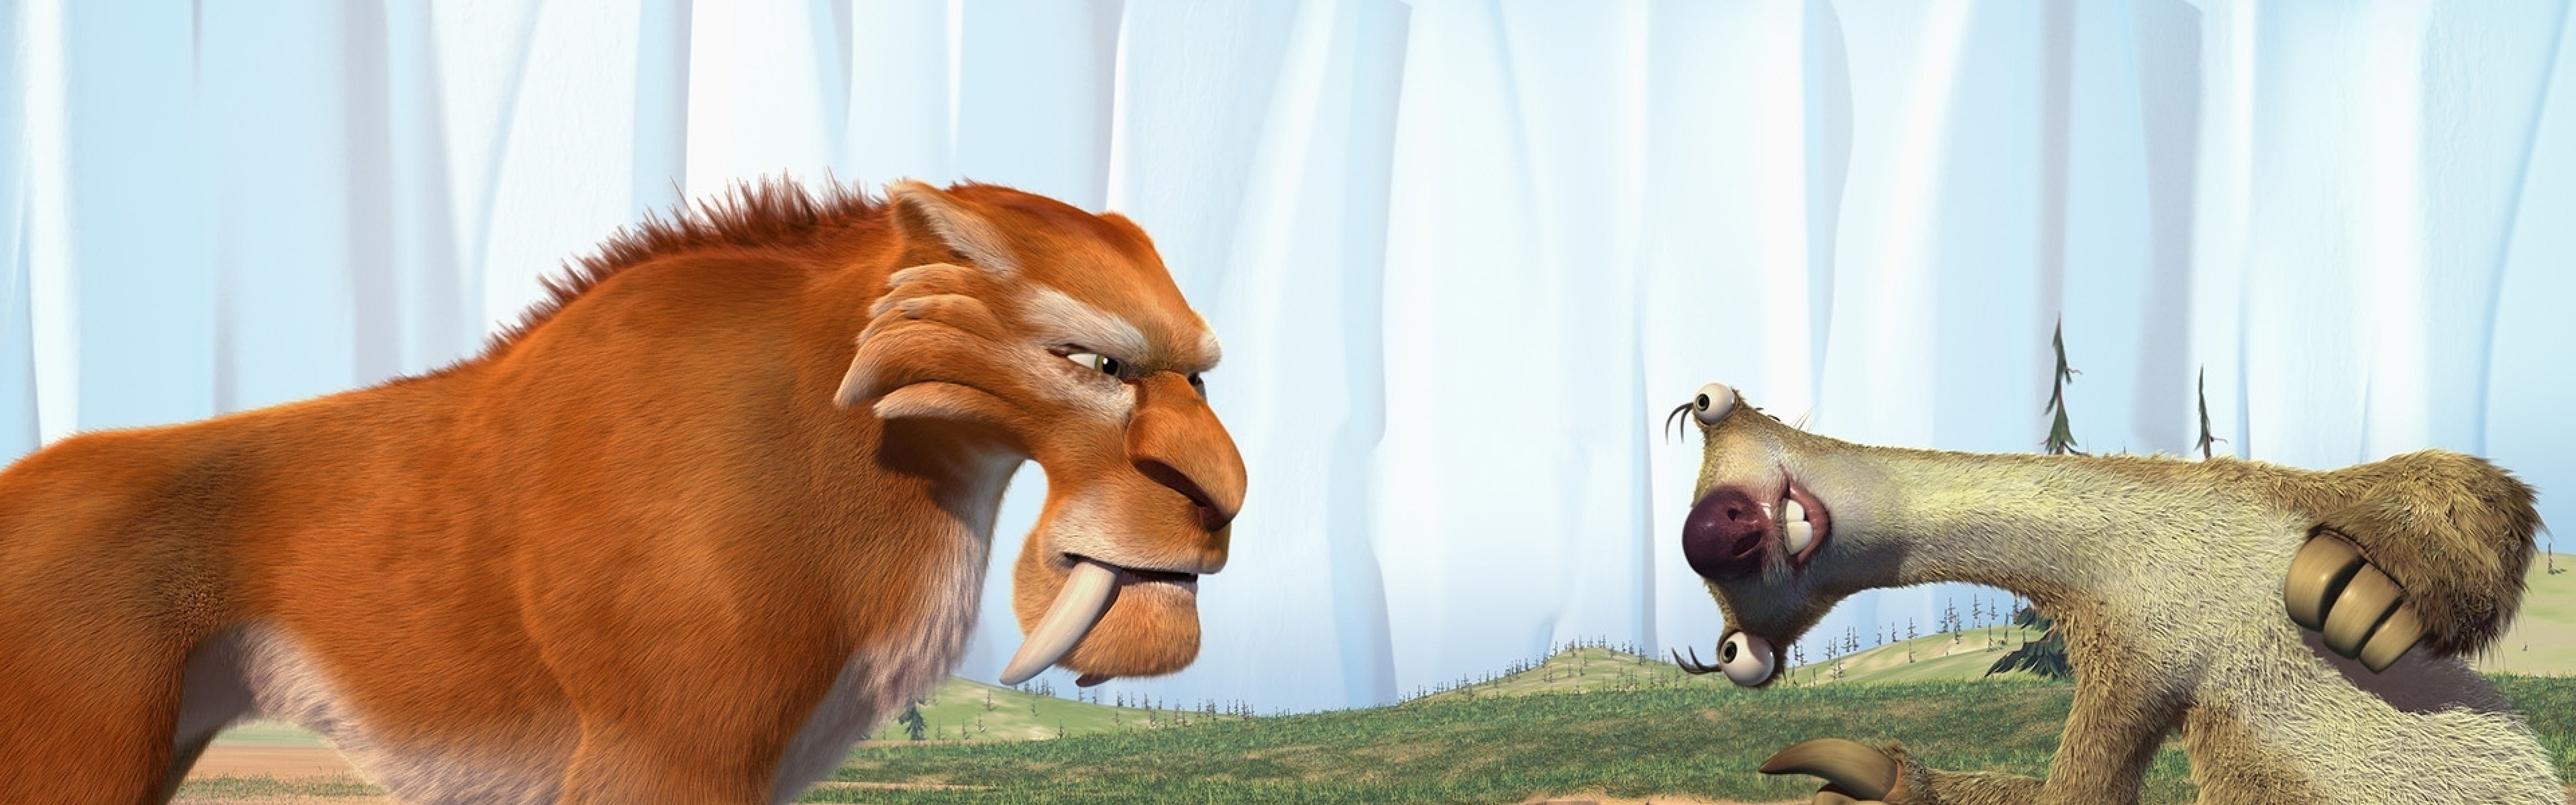 Wallpaper Ice Age, Diego, Sid, Saber Toothed Tiger, Sloth